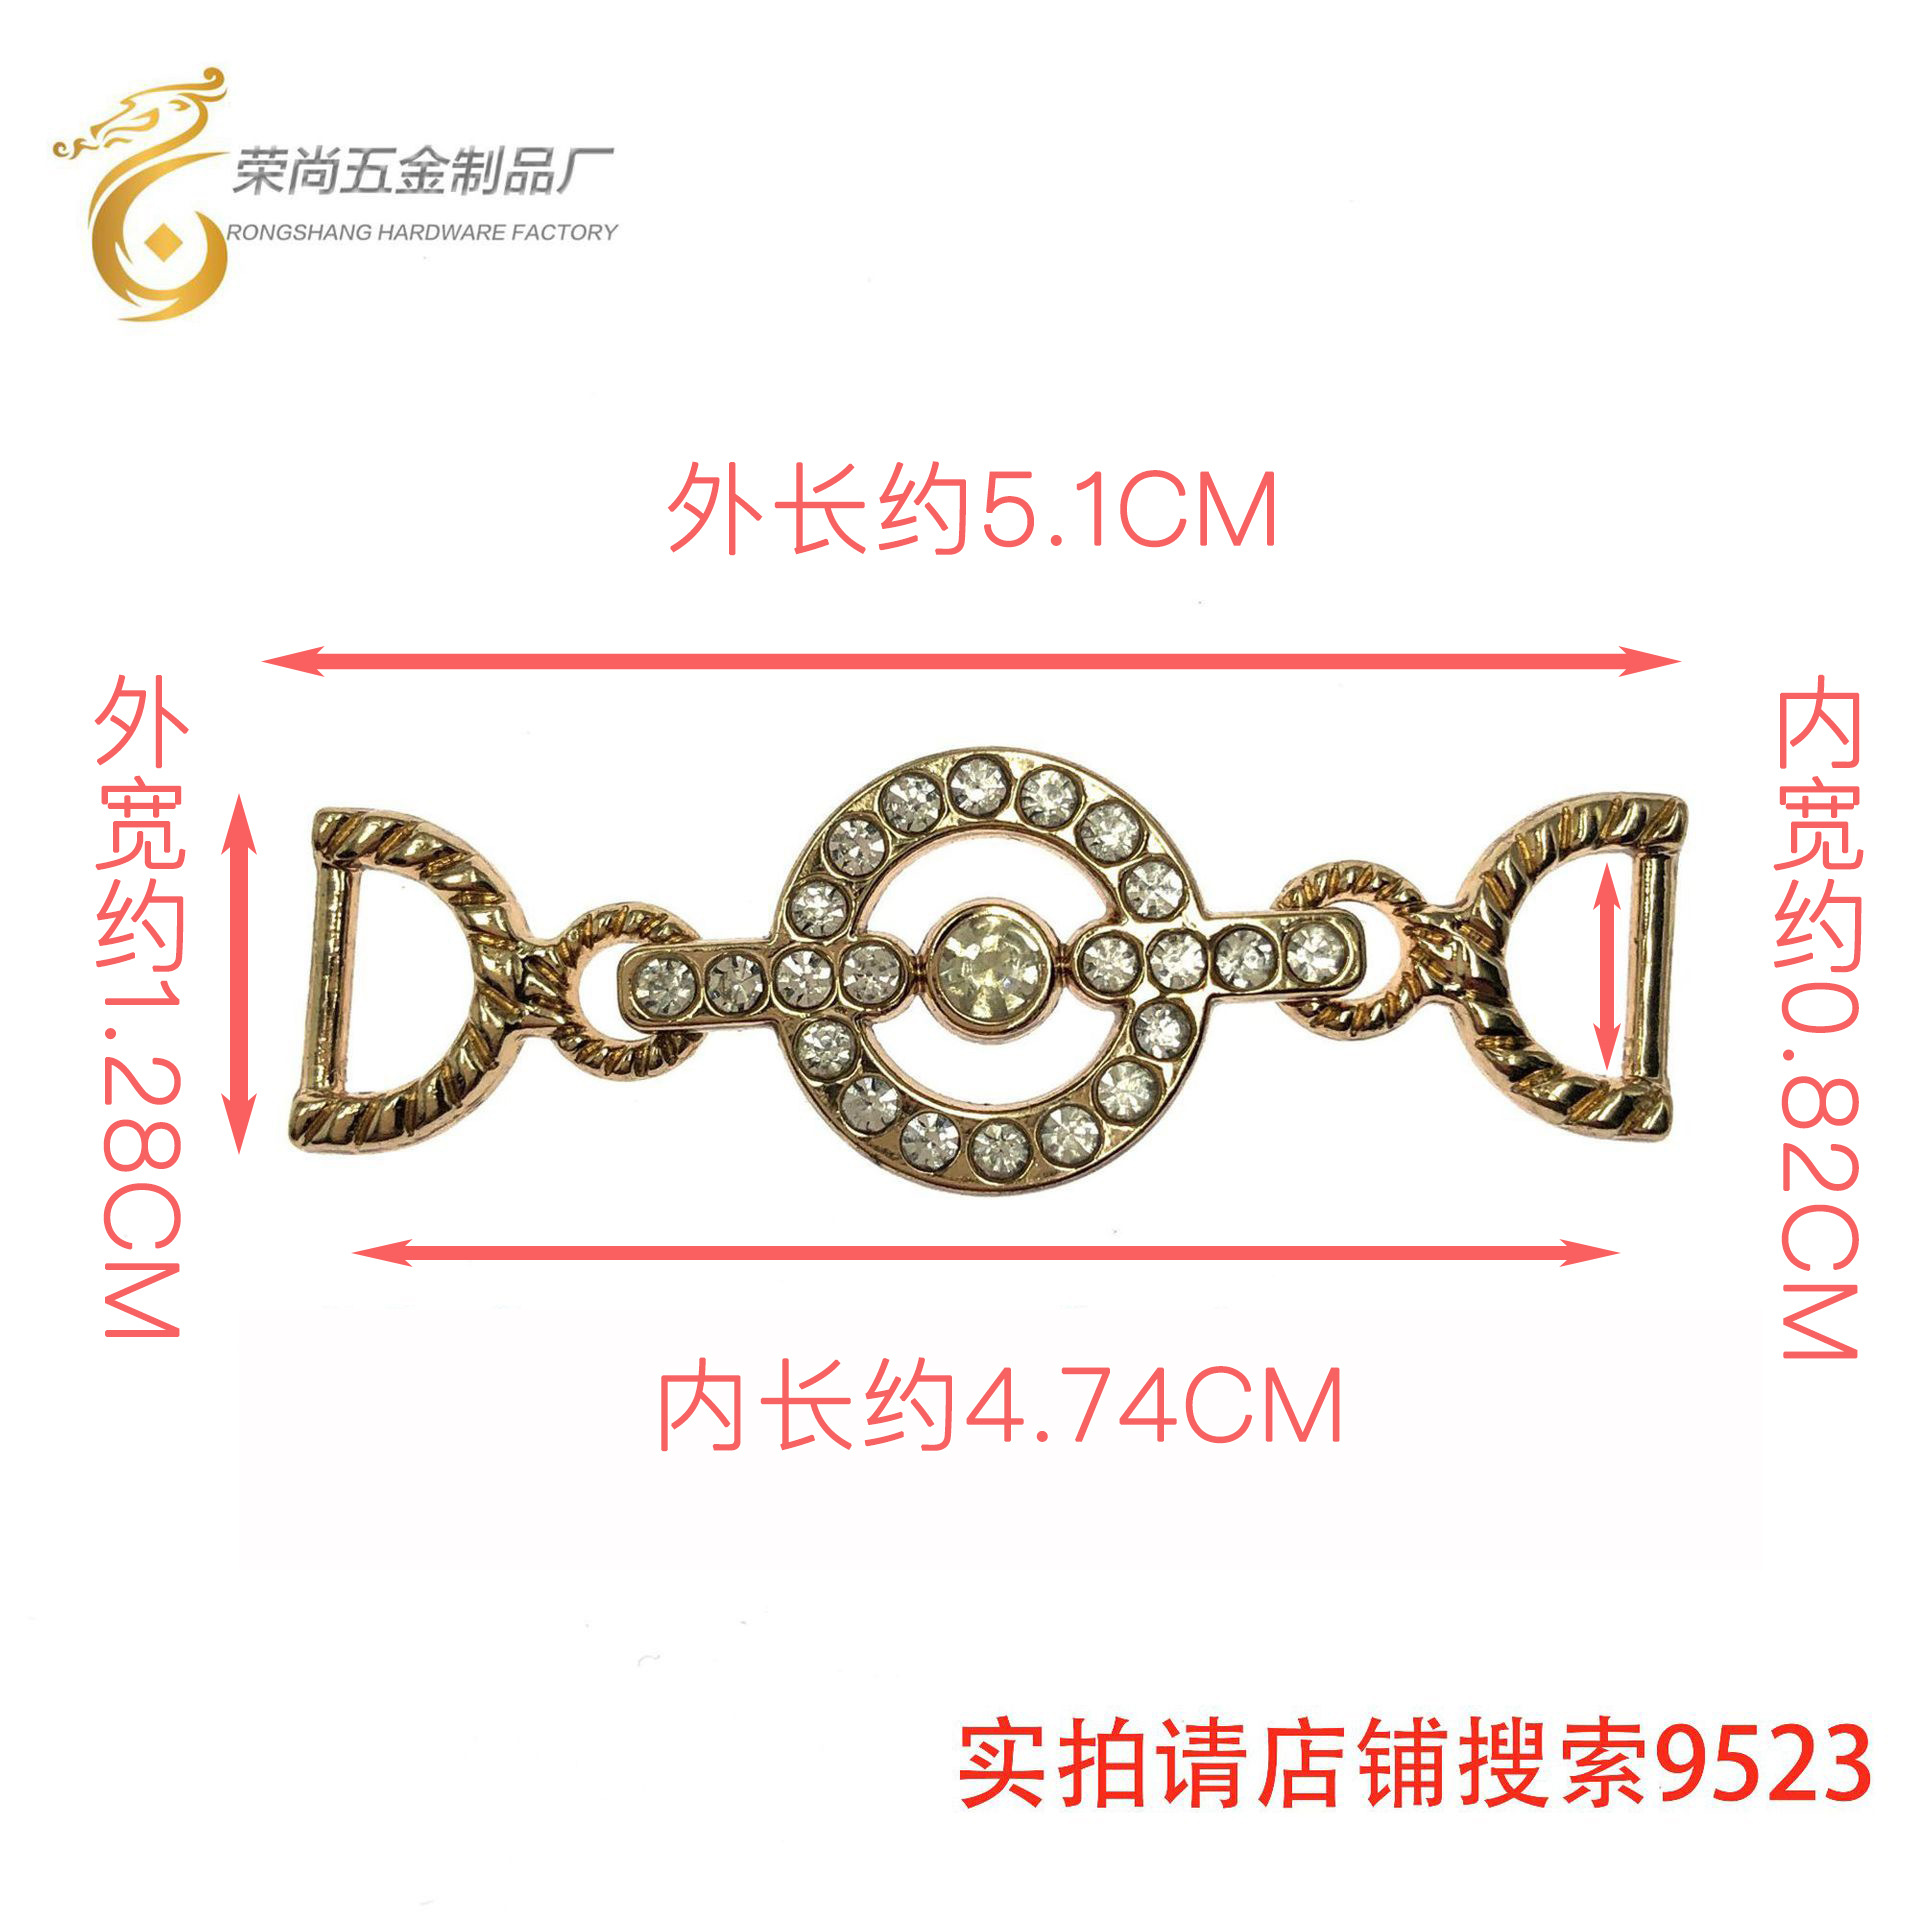 Tods Alloy Gloves Chain a Pair of Buckles Women's Shoes Clothing Metal Decorative Chain DIY Belt Swimsuit Shoe Buckle Accessories